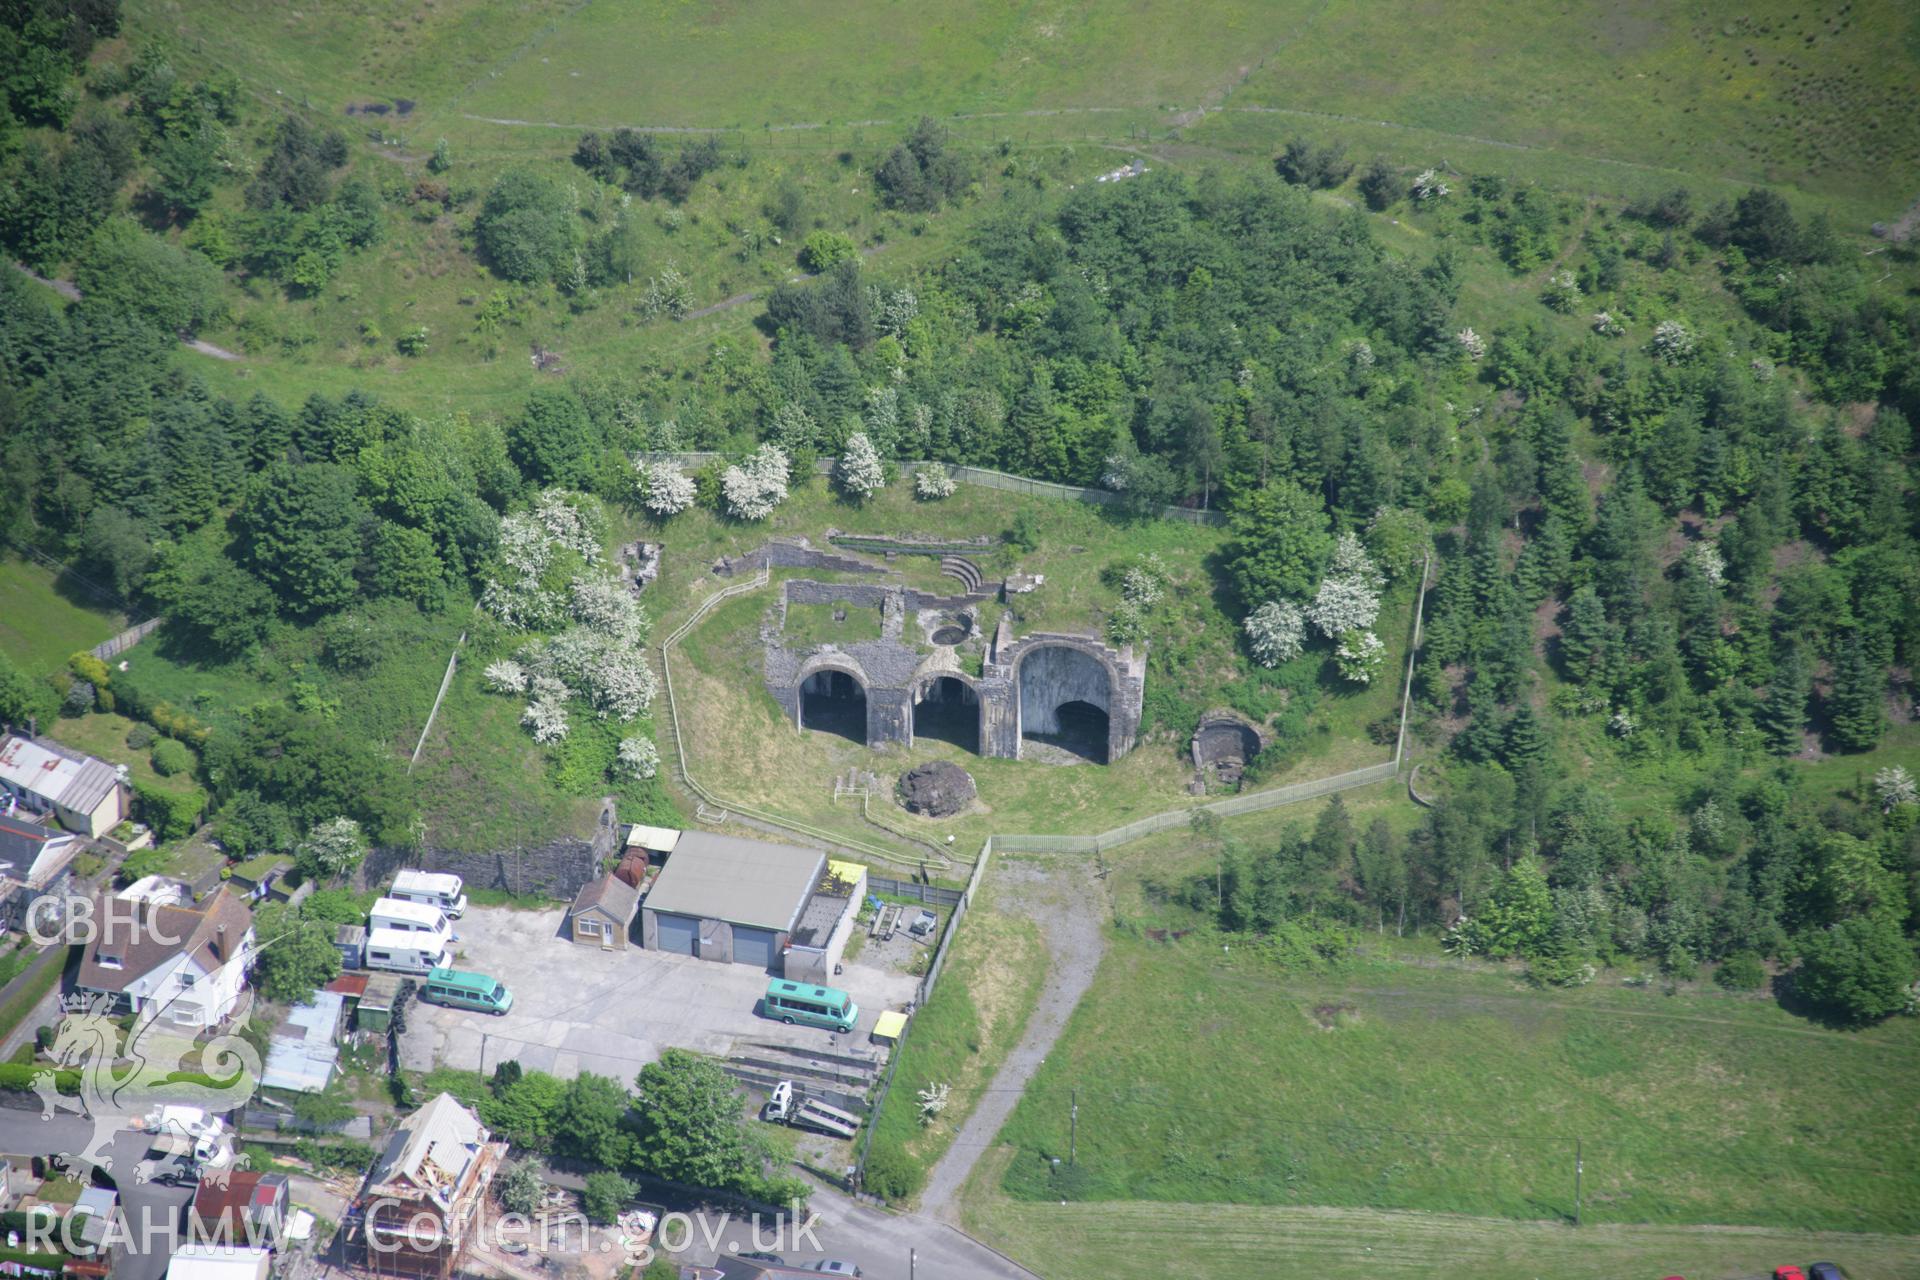 RCAHMW colour oblique aerial photograph of Sirhowy Ironworks, Tredegar, from the west. Taken on 09 June 2006 by Toby Driver.